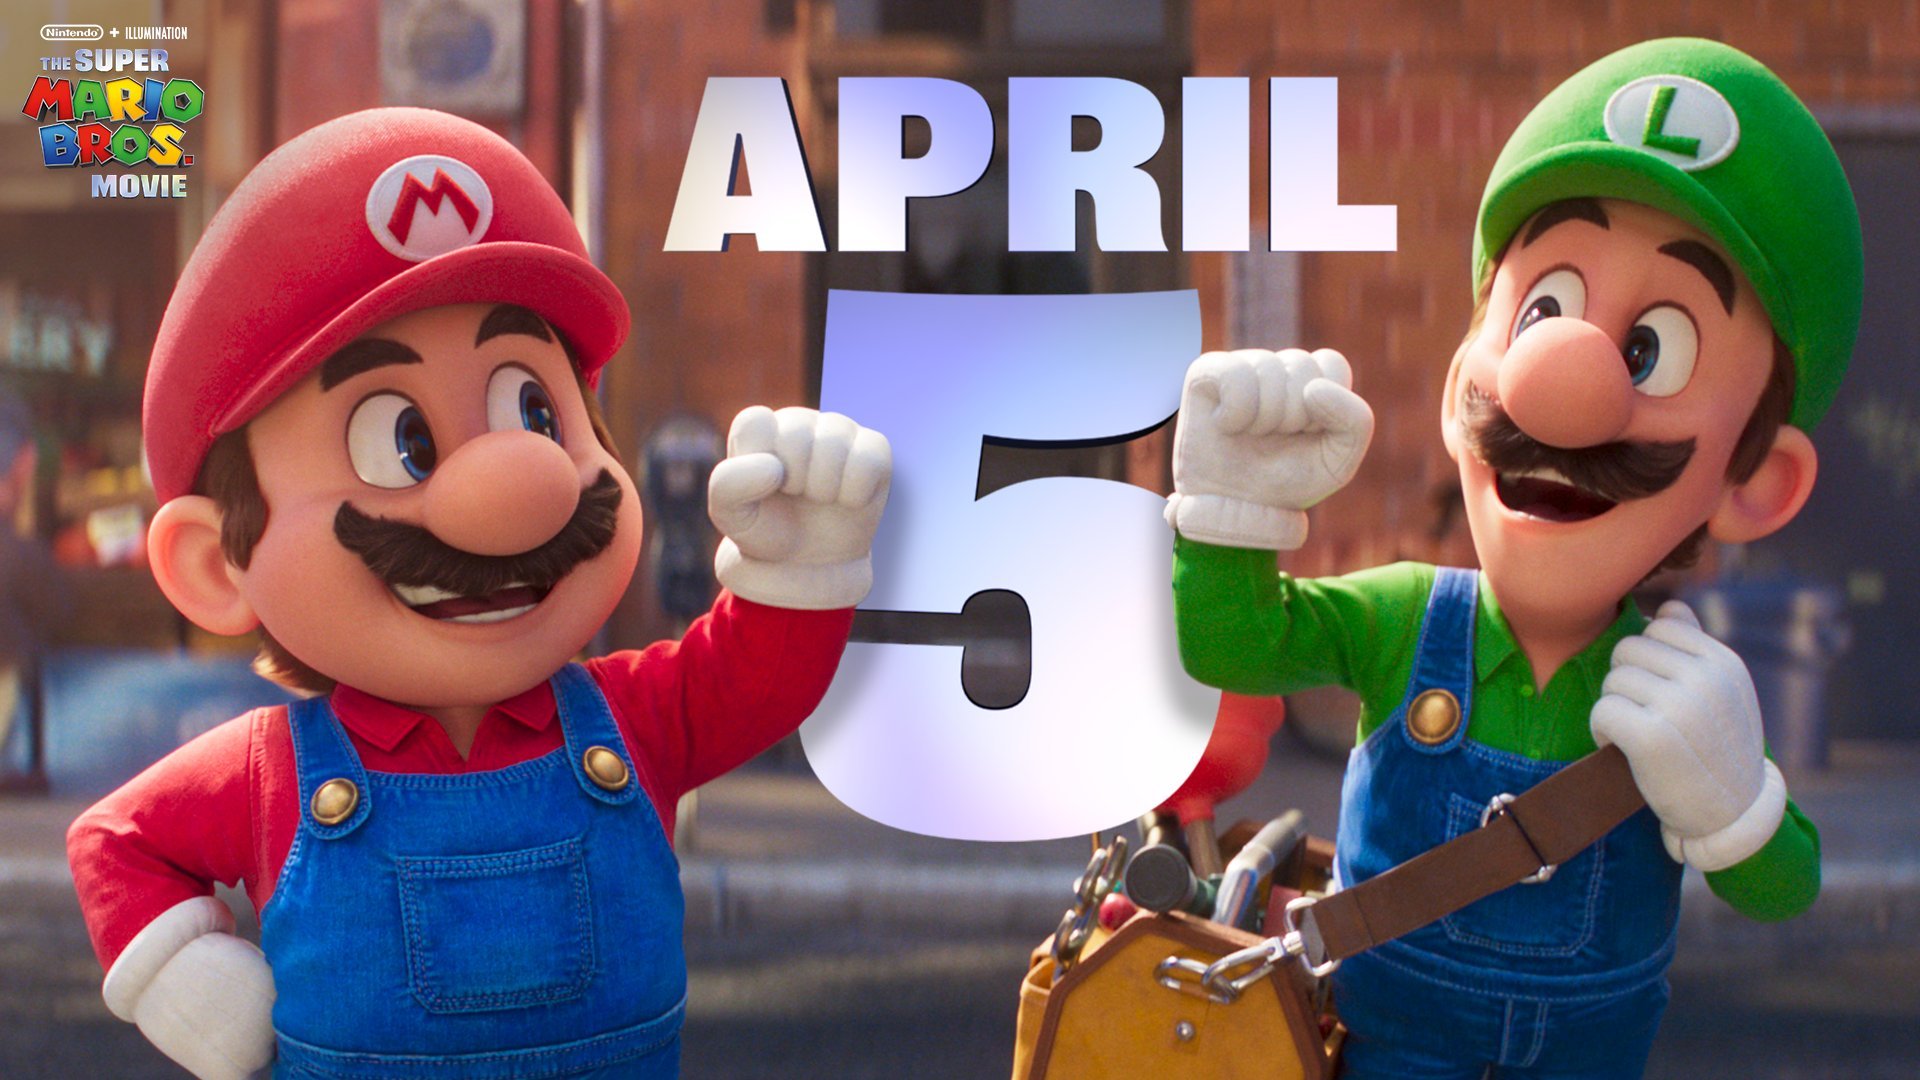 Super Mario Bros.: The Movie advances its premiere in 60 countries, including Spain